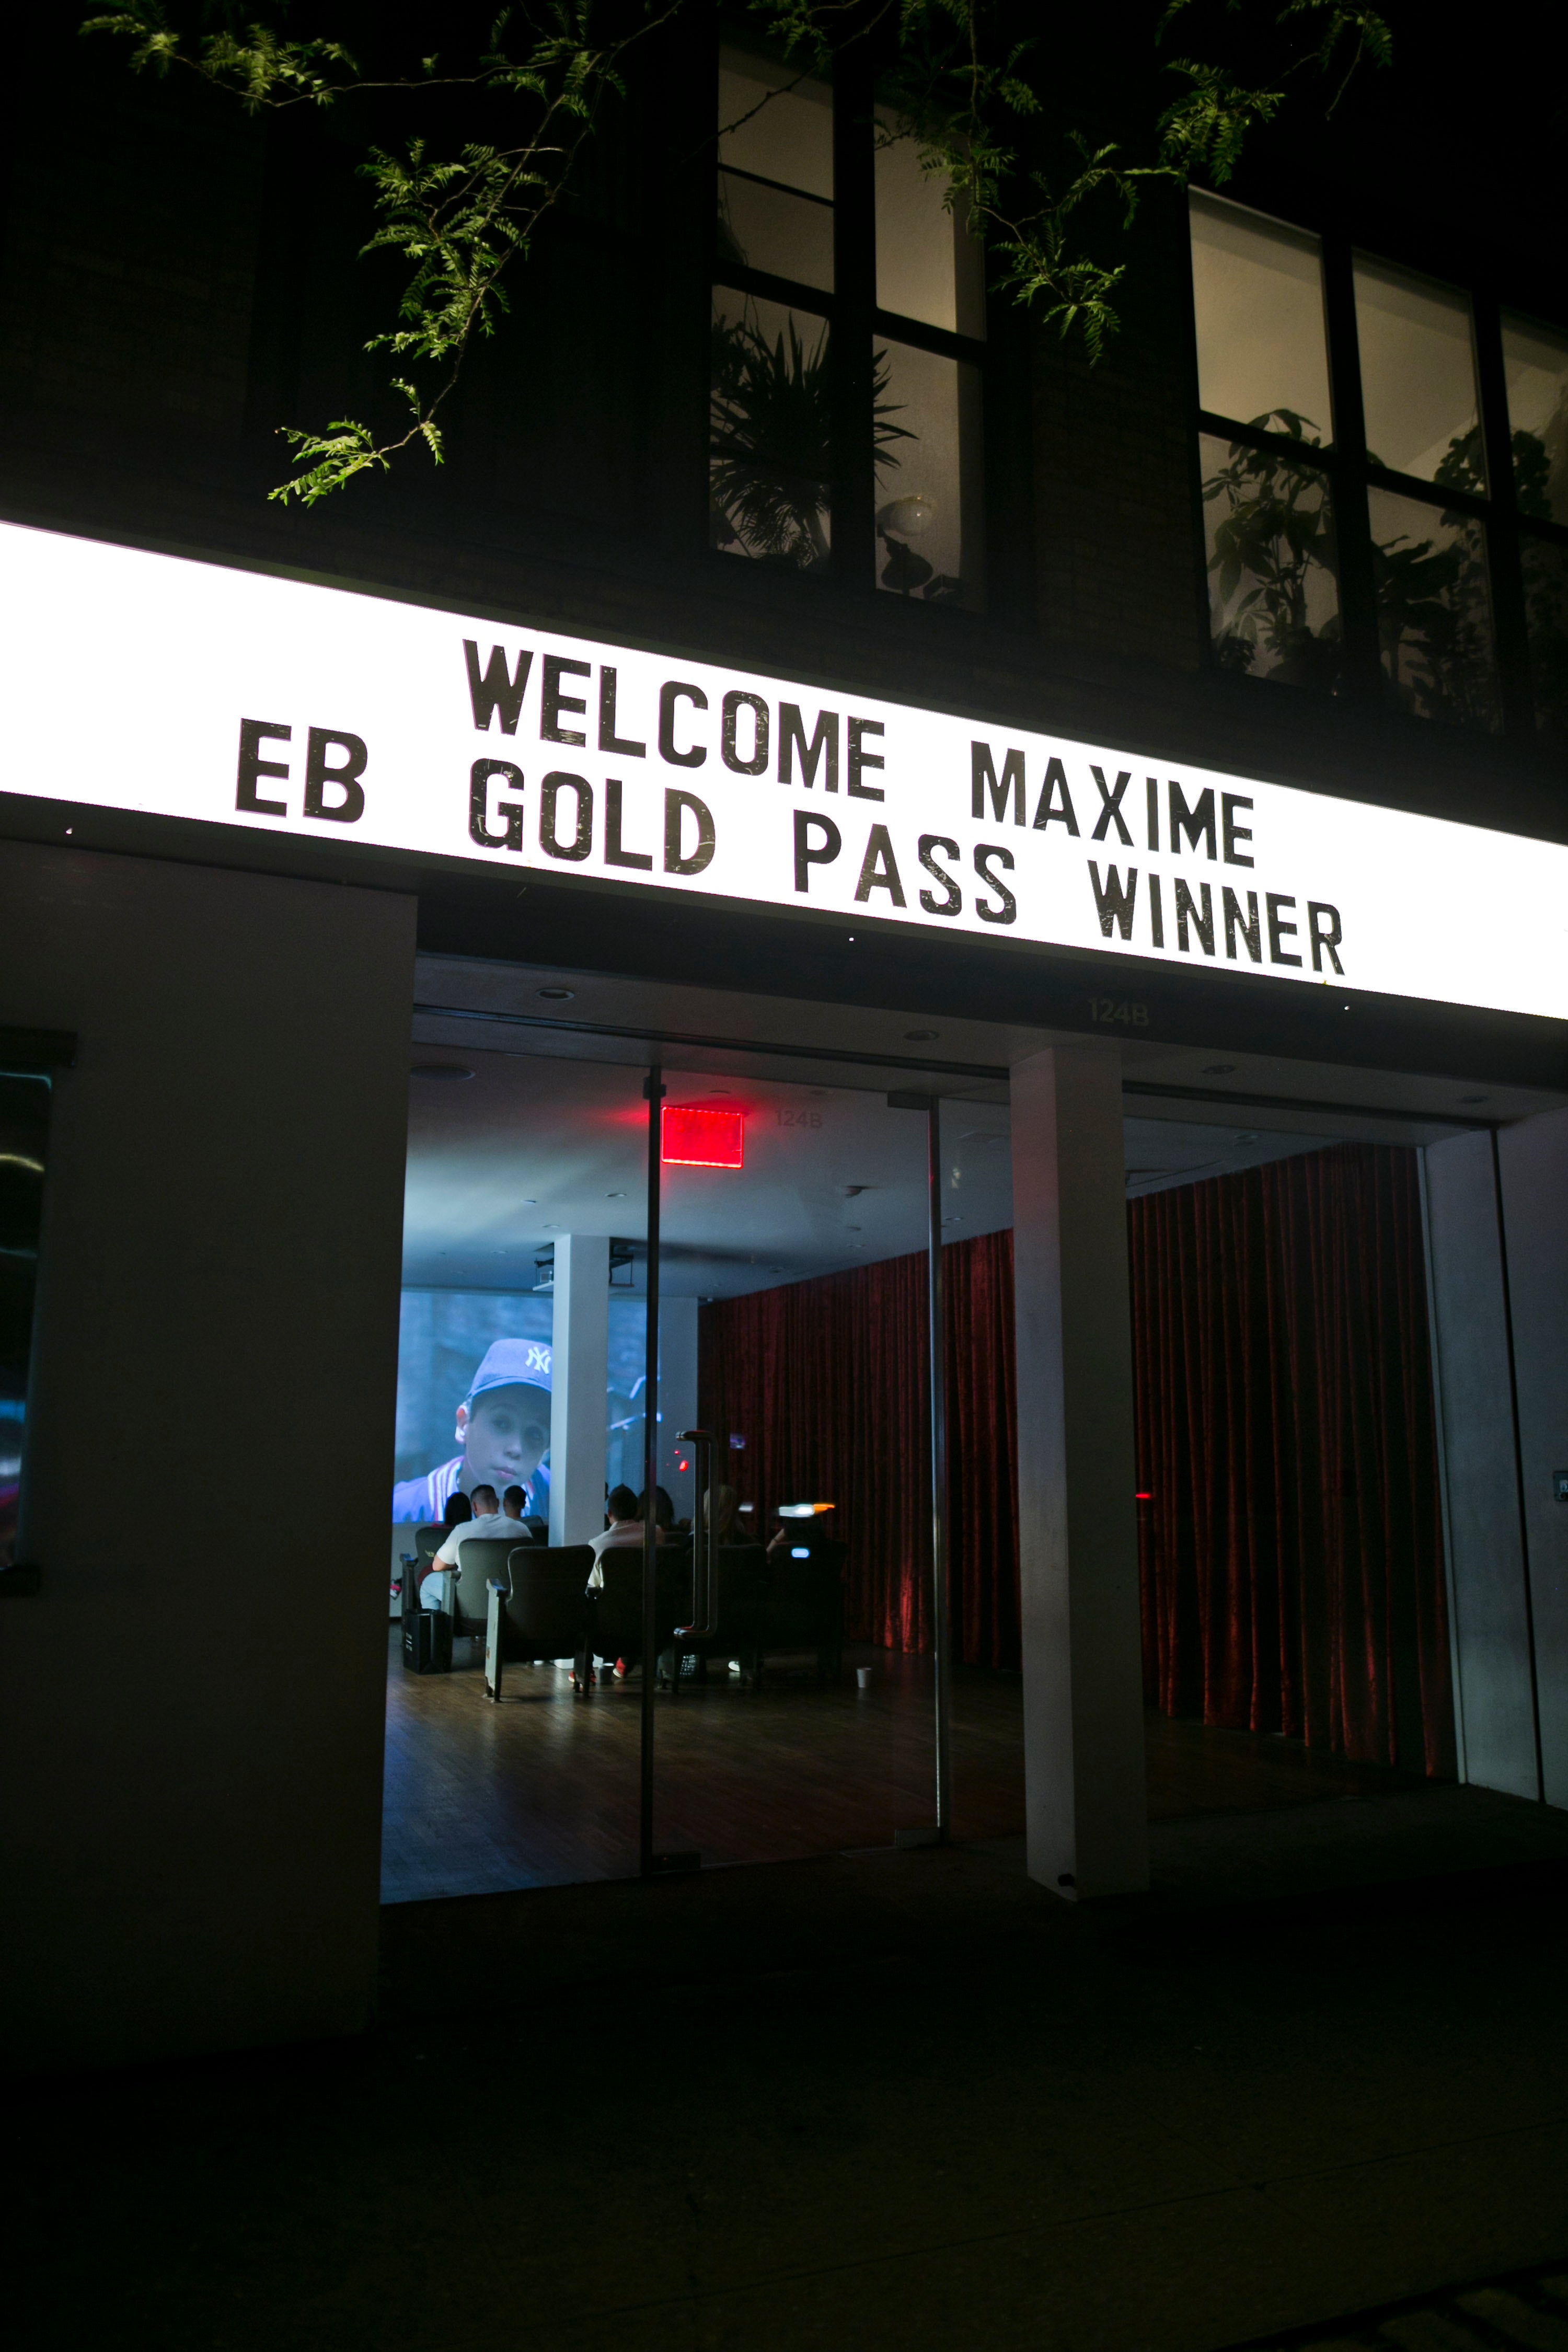 We are happy to announce our EB Gold Pass Winner... Maxime ! card image